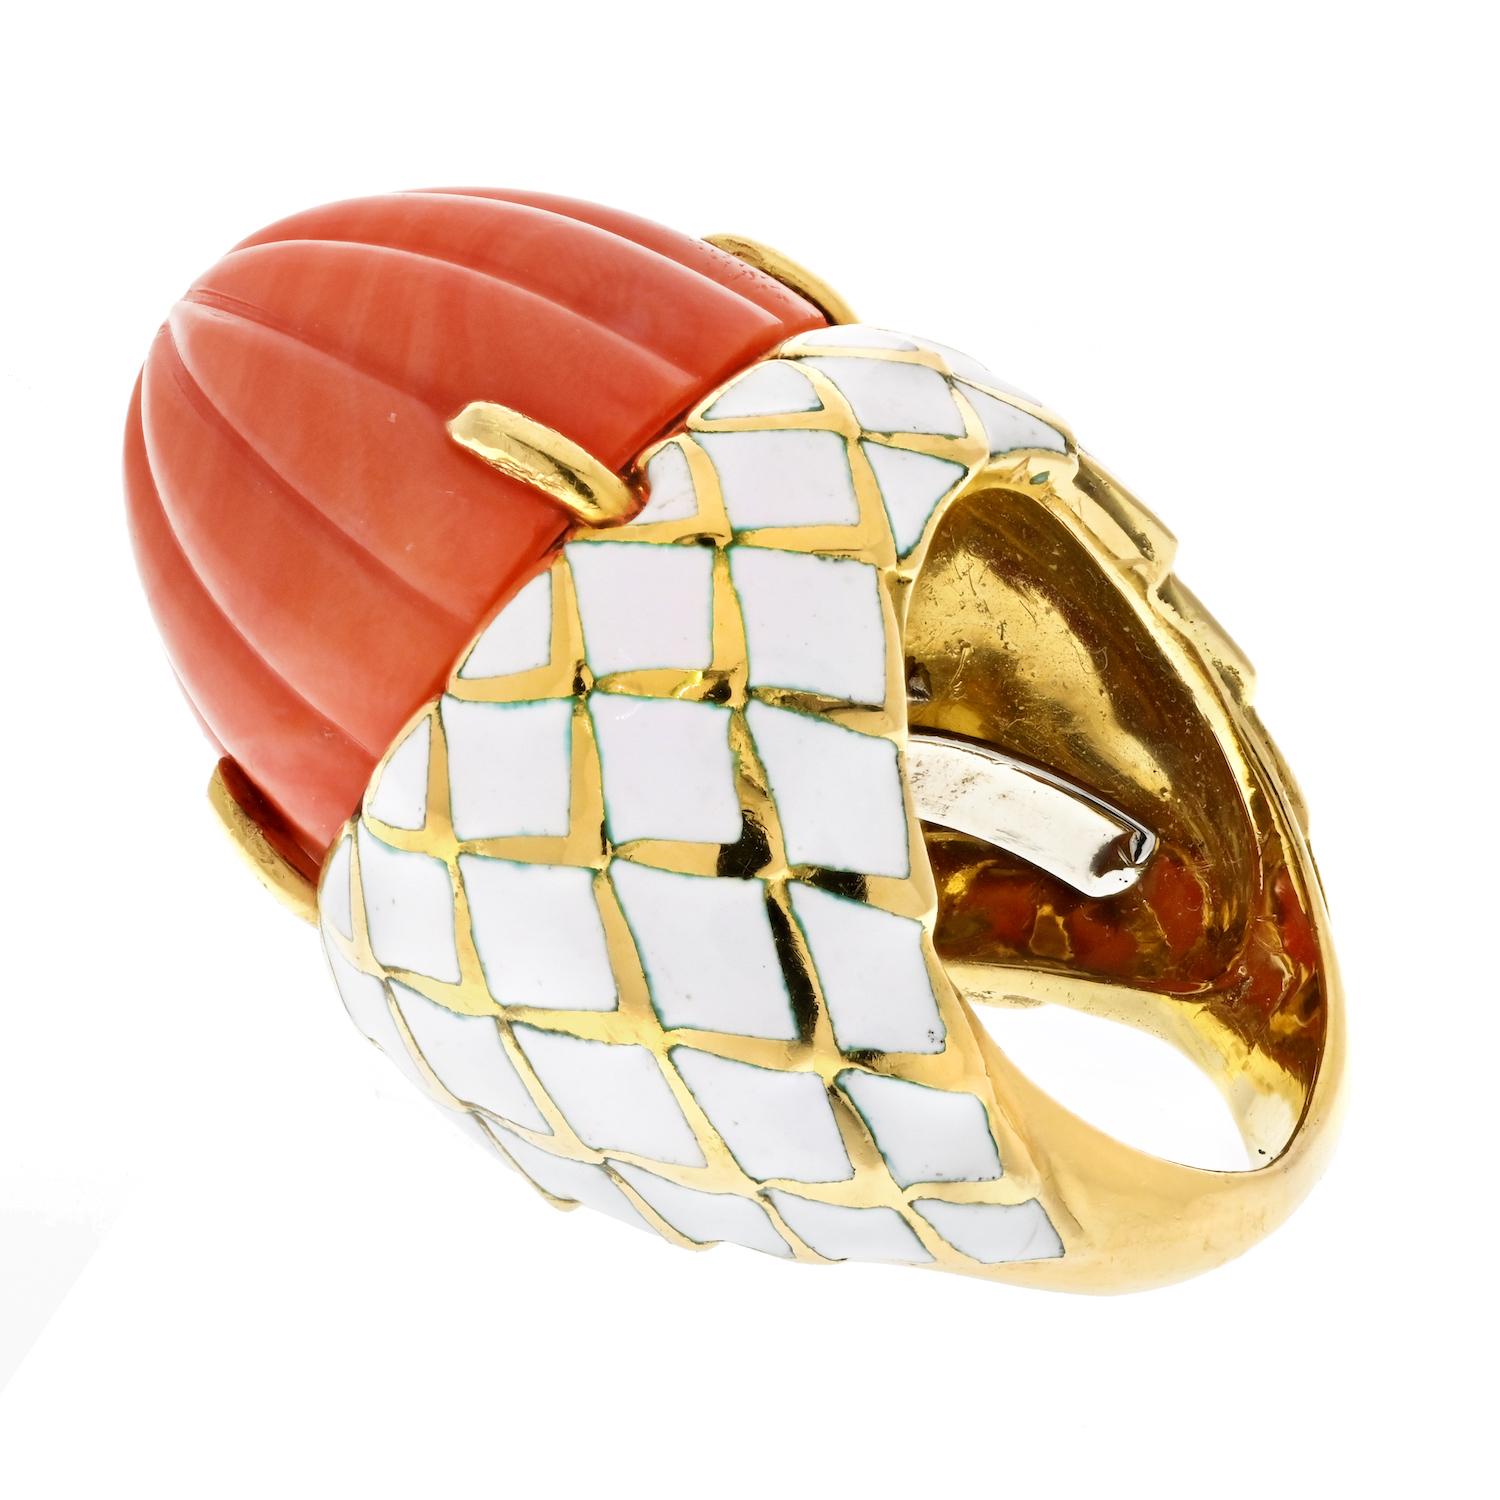 Cabochon David Webb Bombe Platinum & 18k Yellow Gold Carved Coral White Enamel Ring For Sale